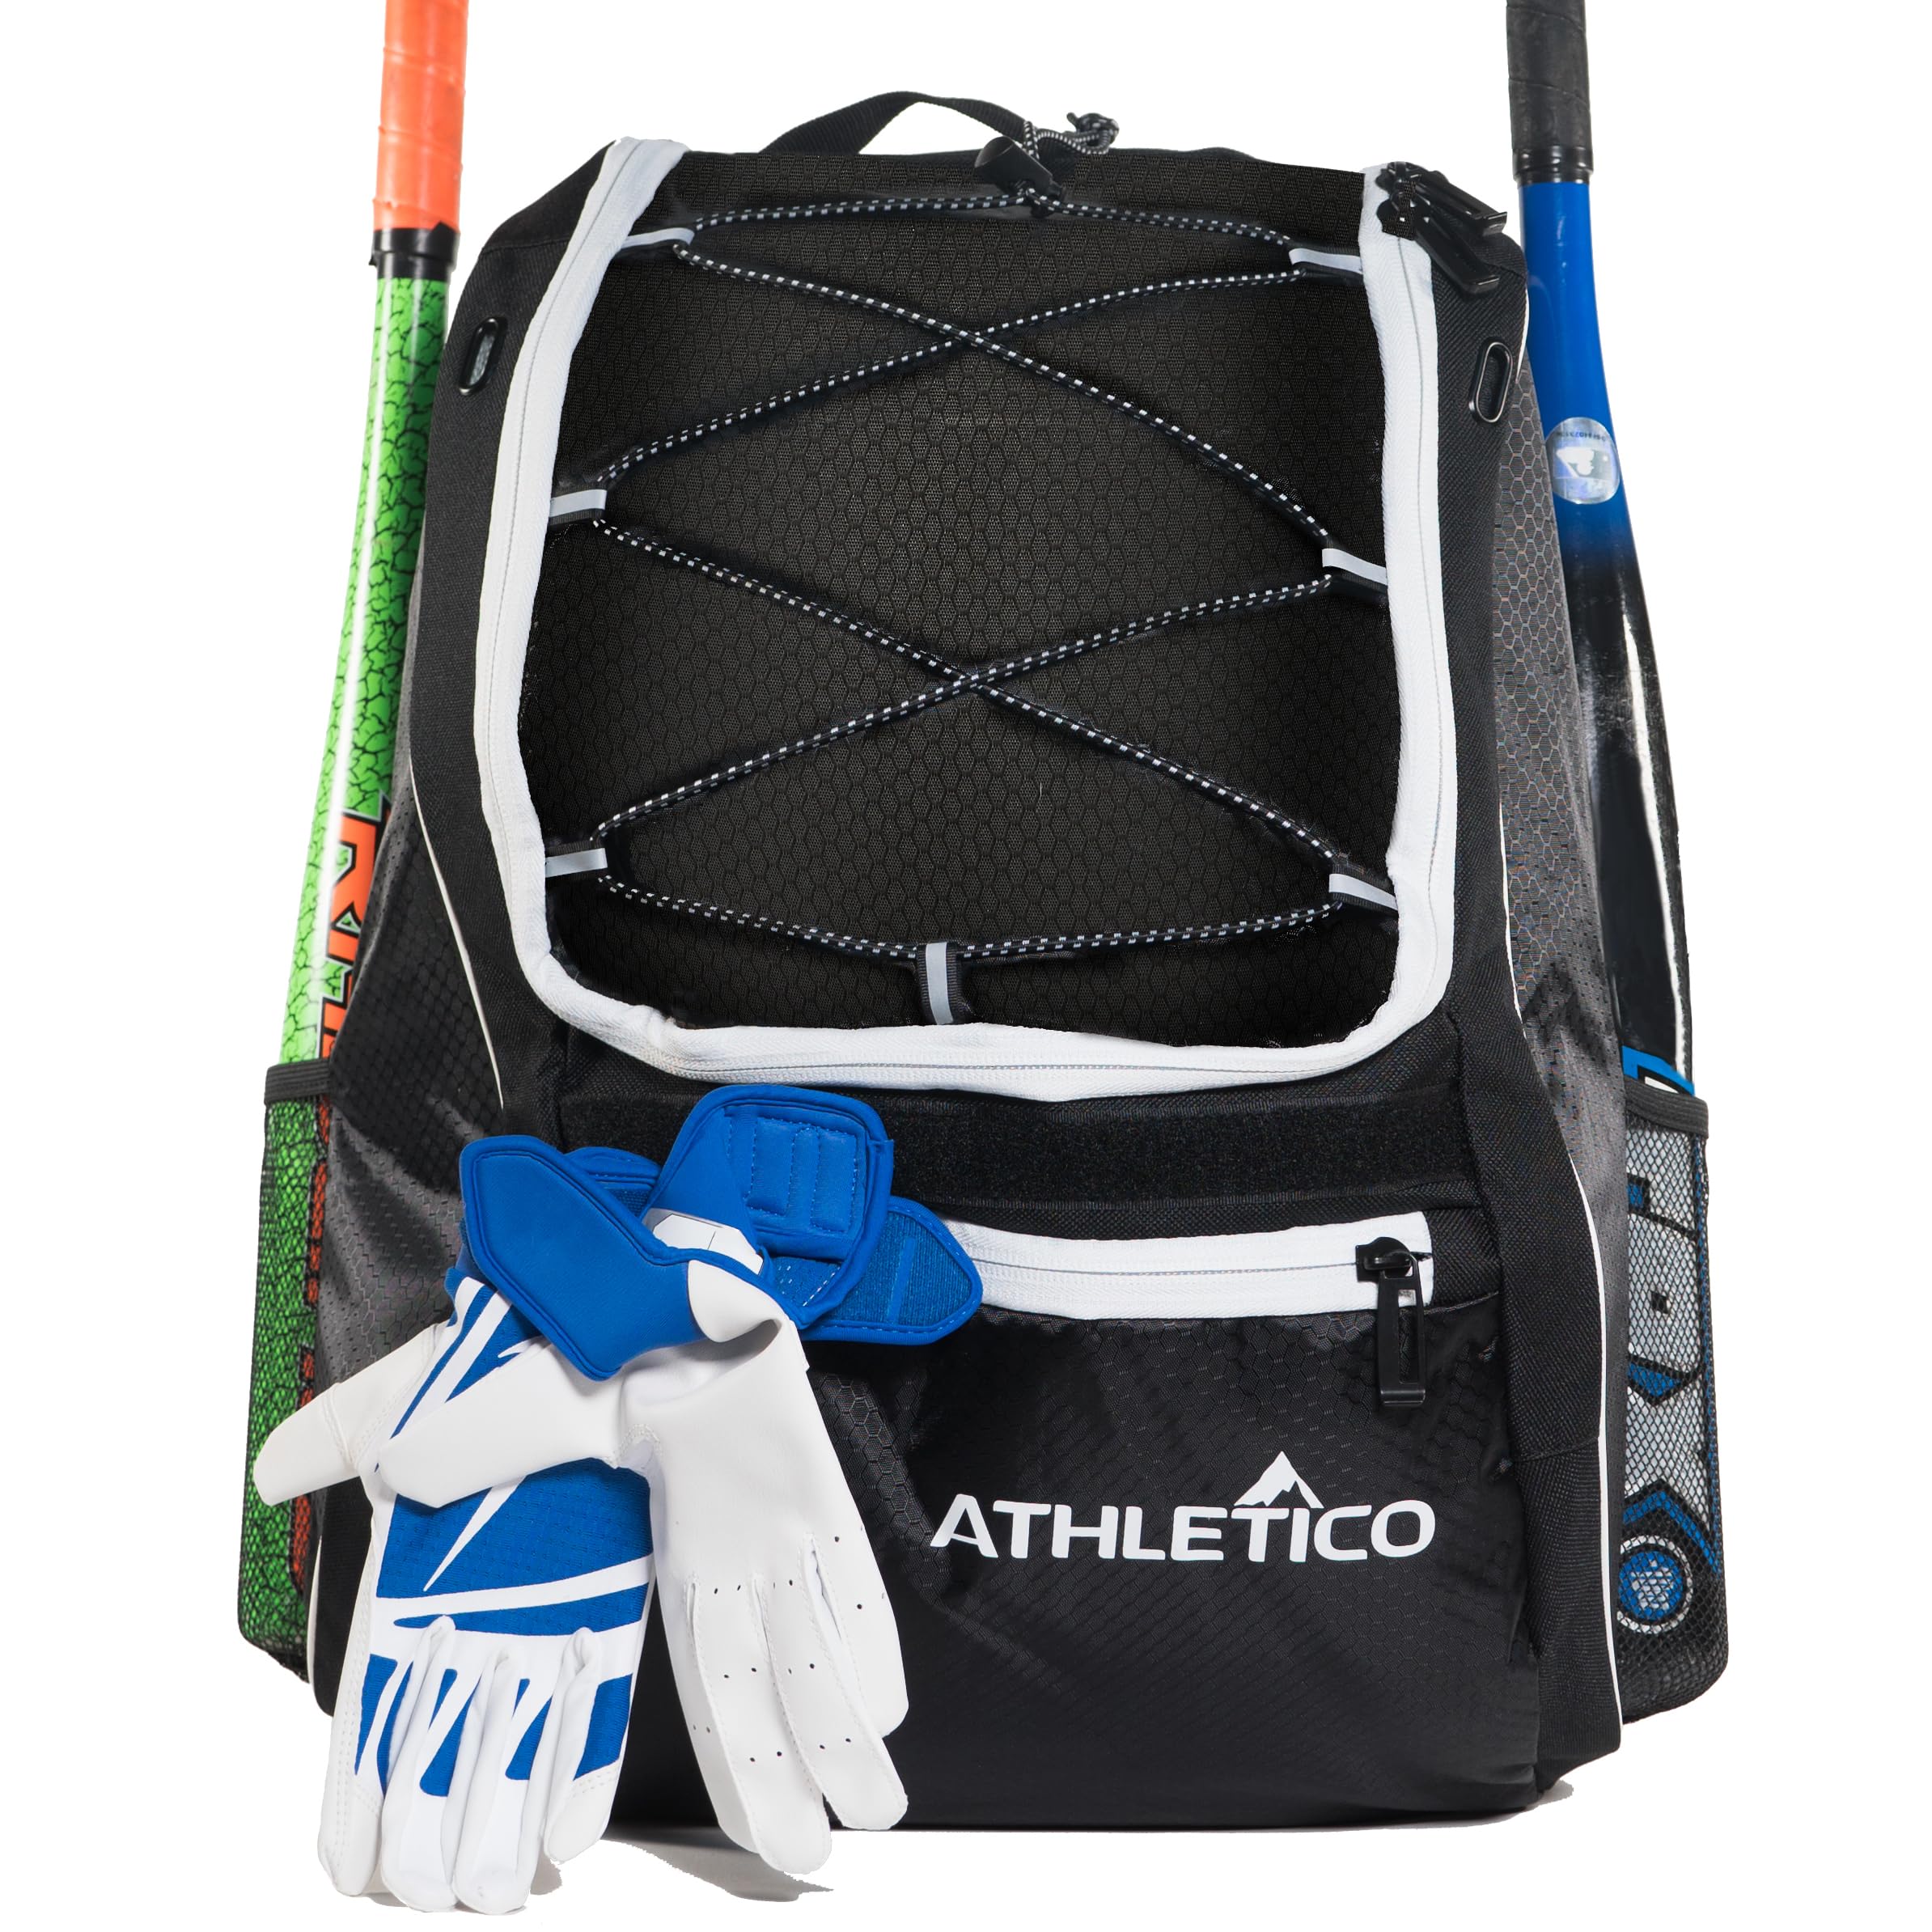 Athletico Baseball Bat Bag - Backpack for Baseball, T-Ball & Softball Equipment & Gear for Youth and Adults | Holds Bat, Helmet, Glove, & Shoes |Shoe Compartment & Fence Hook  - Collectible Very Good